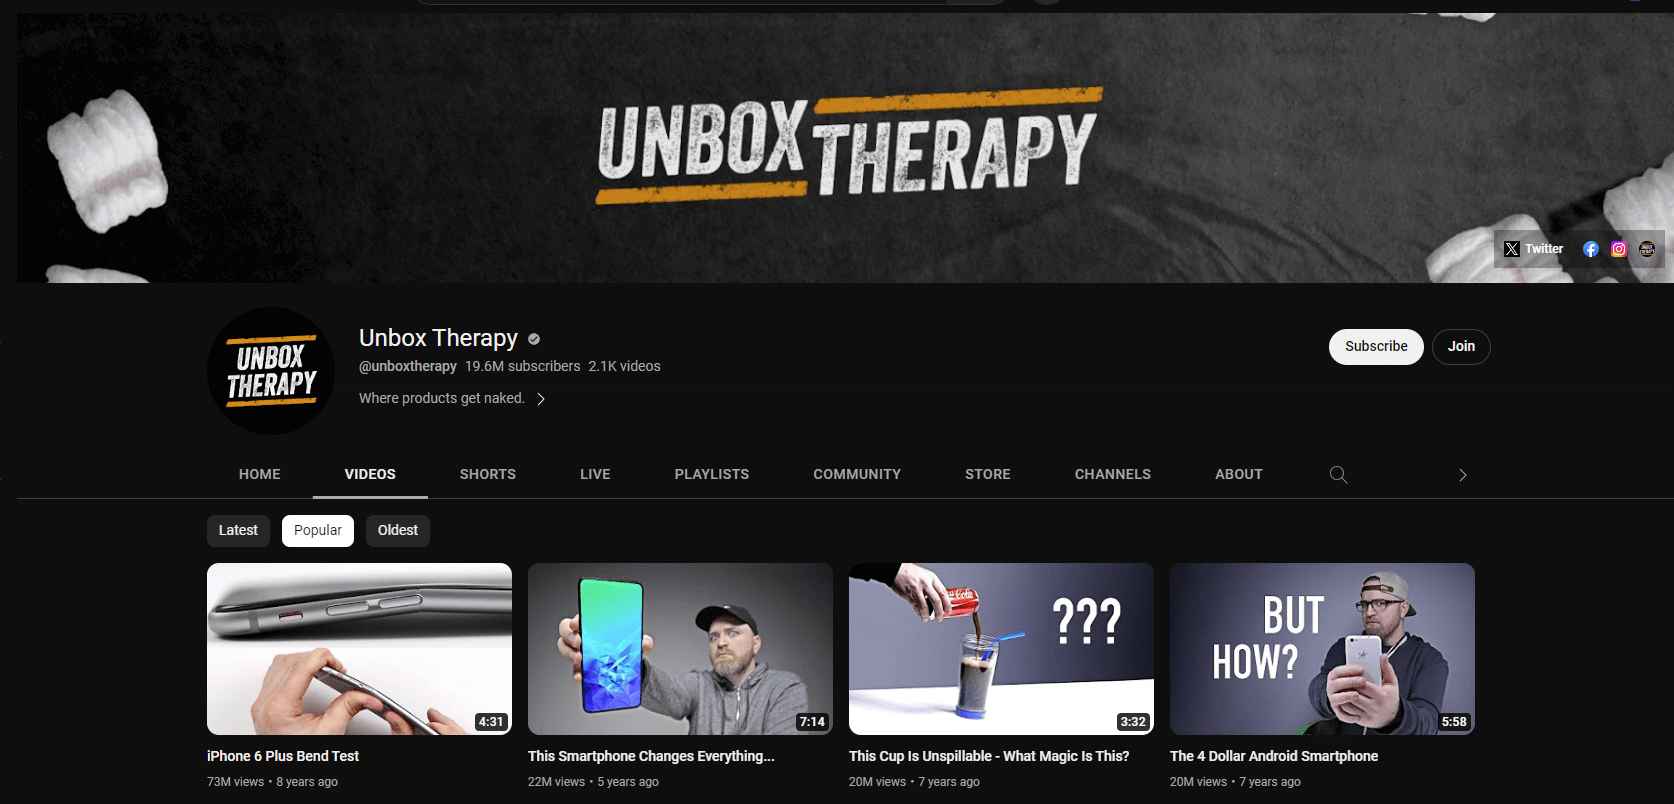 Unbox Therapy